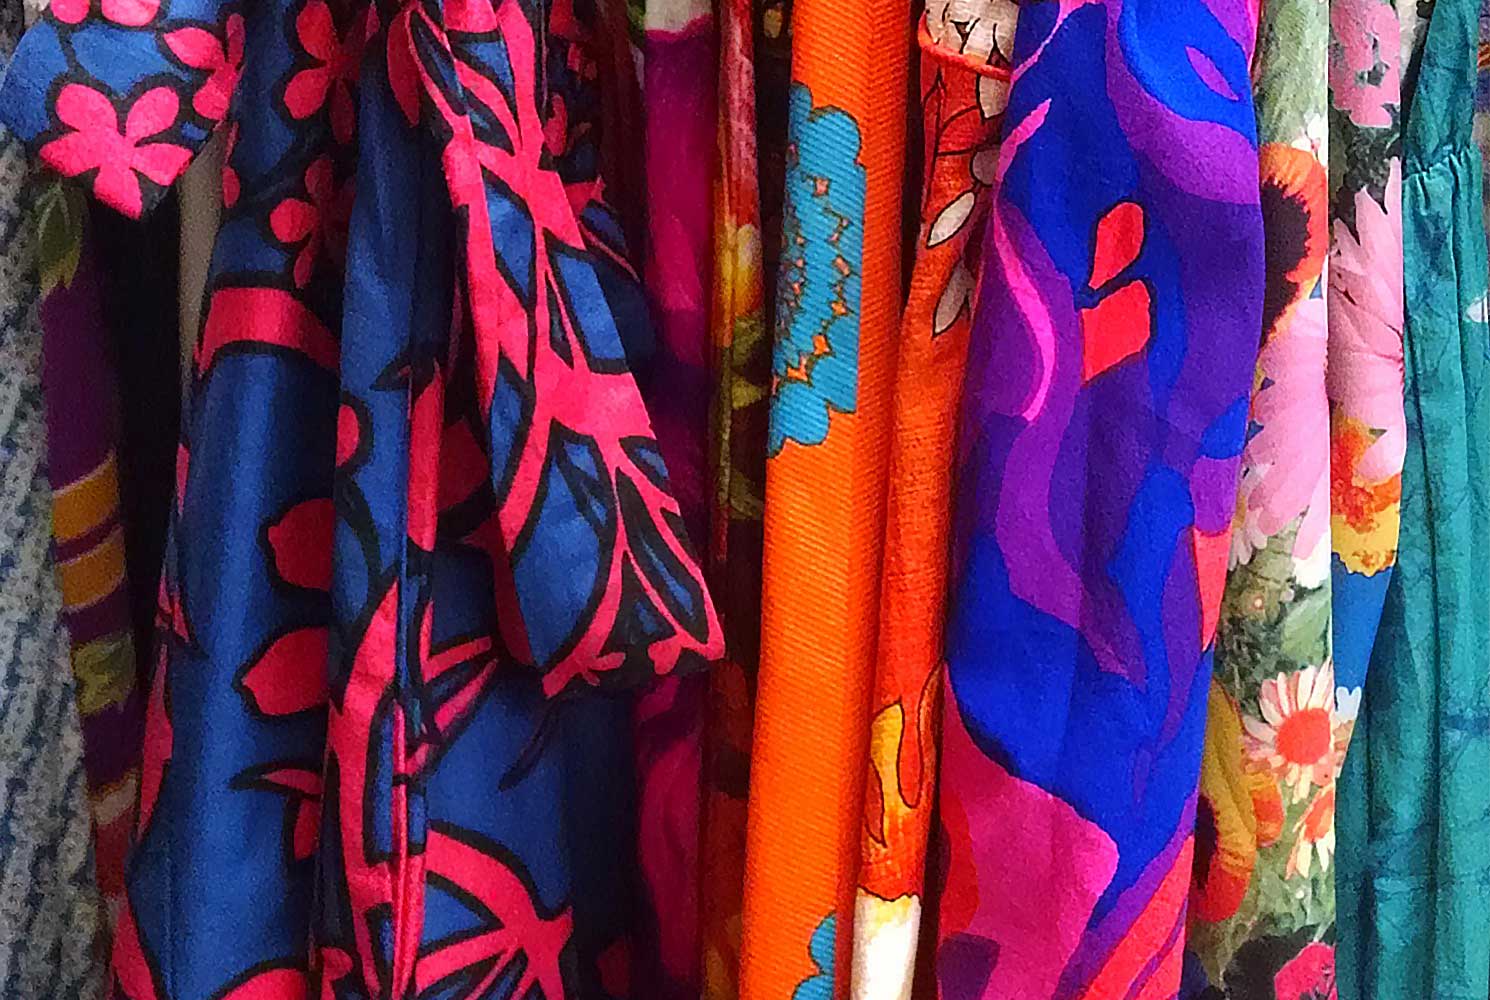 Colorful fabric